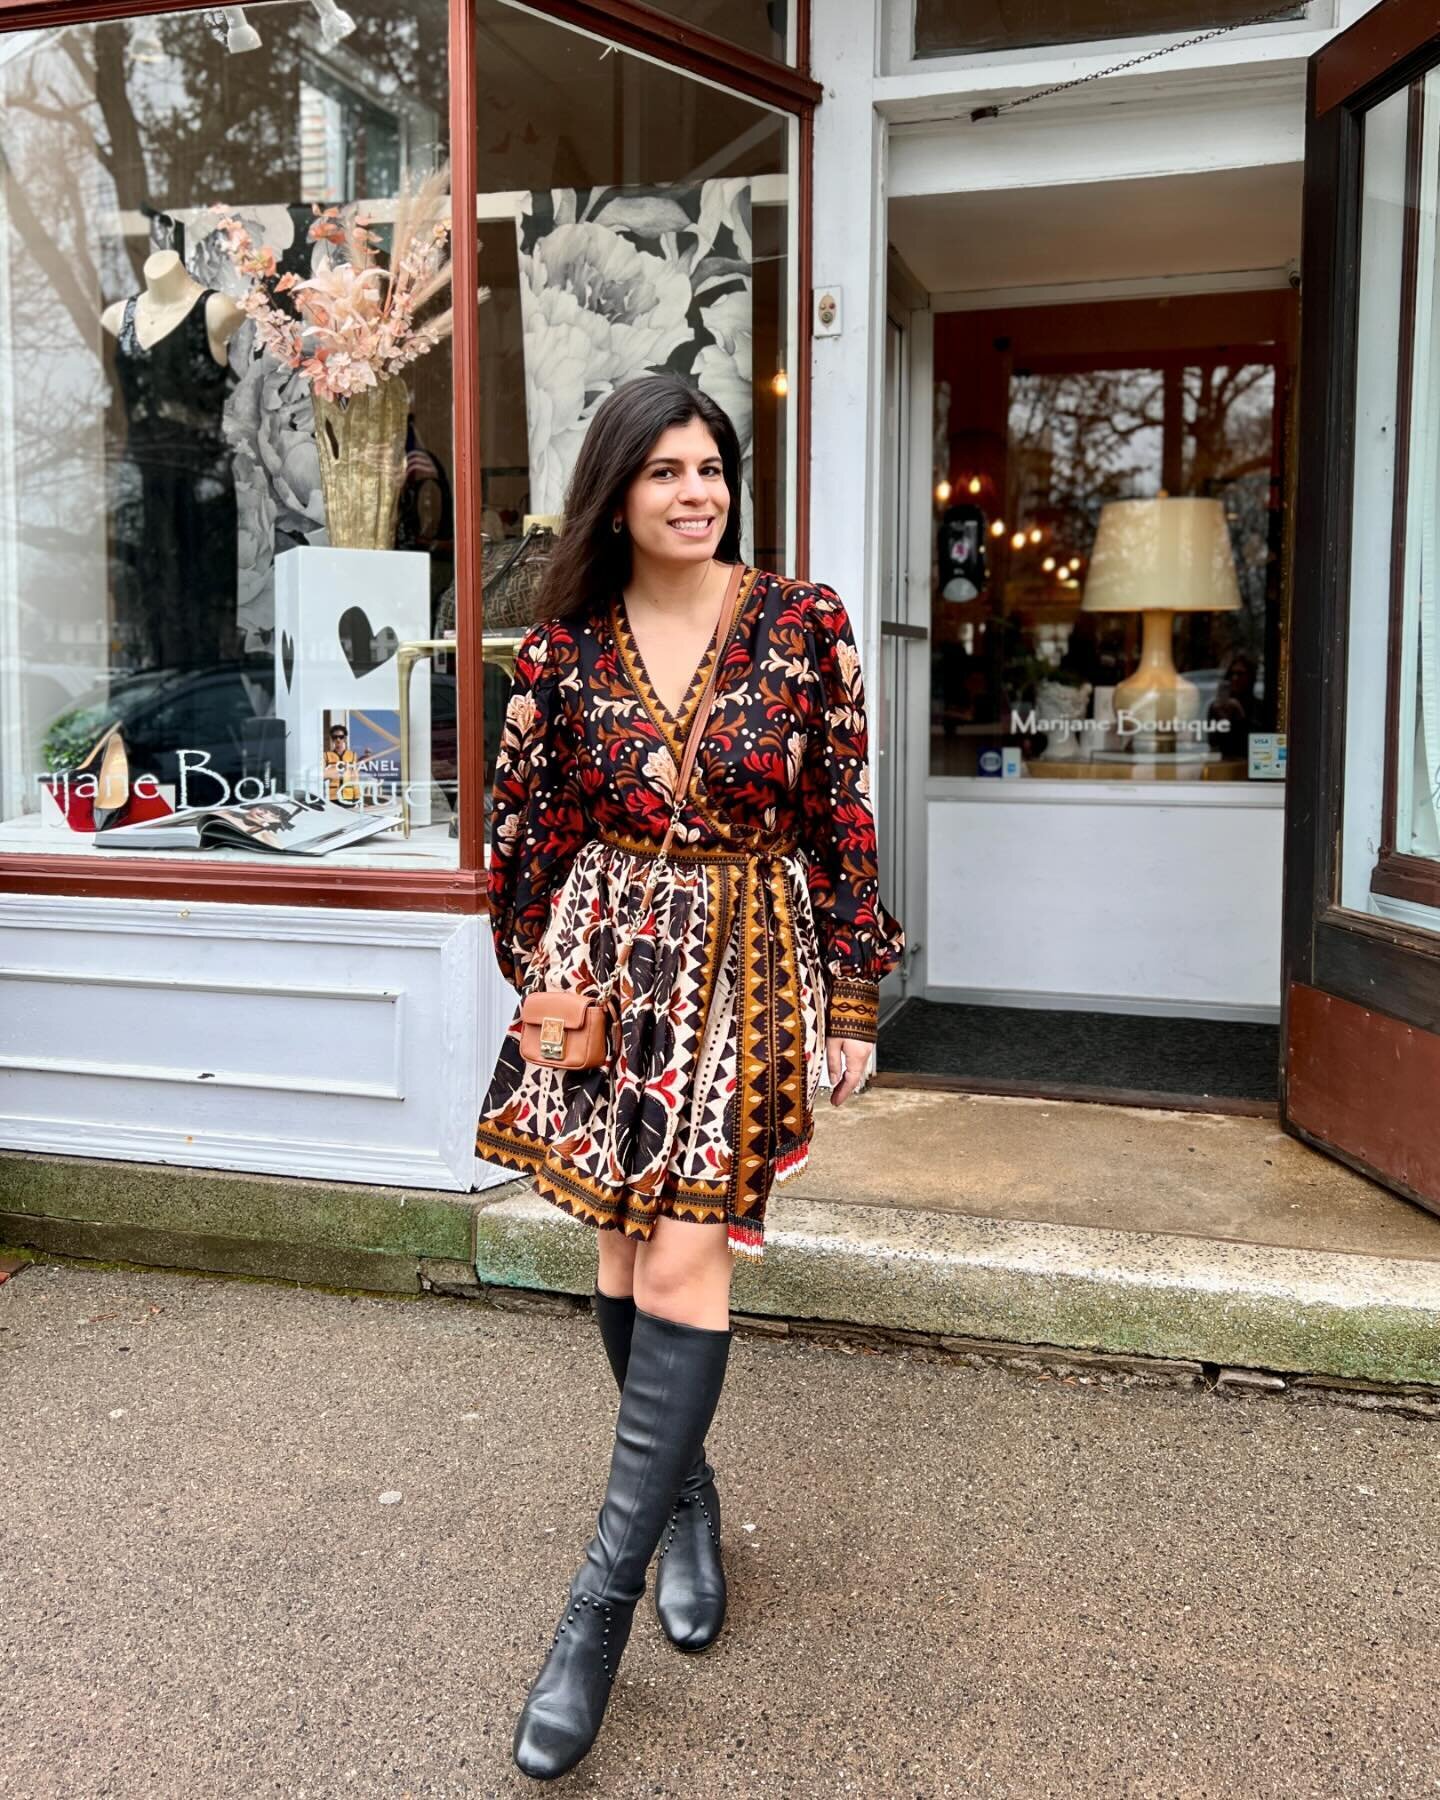 Just a small splash of red with this fabulous Farm Rio dress, and snatch up this cute Anya Hindmarch bag now on clearance!

DM on instagram for info!
.
.
.
#shopsmall #shoplocal #Connecticut #shopconsignment #guilfordct #womenownedbusiness #marijaneb